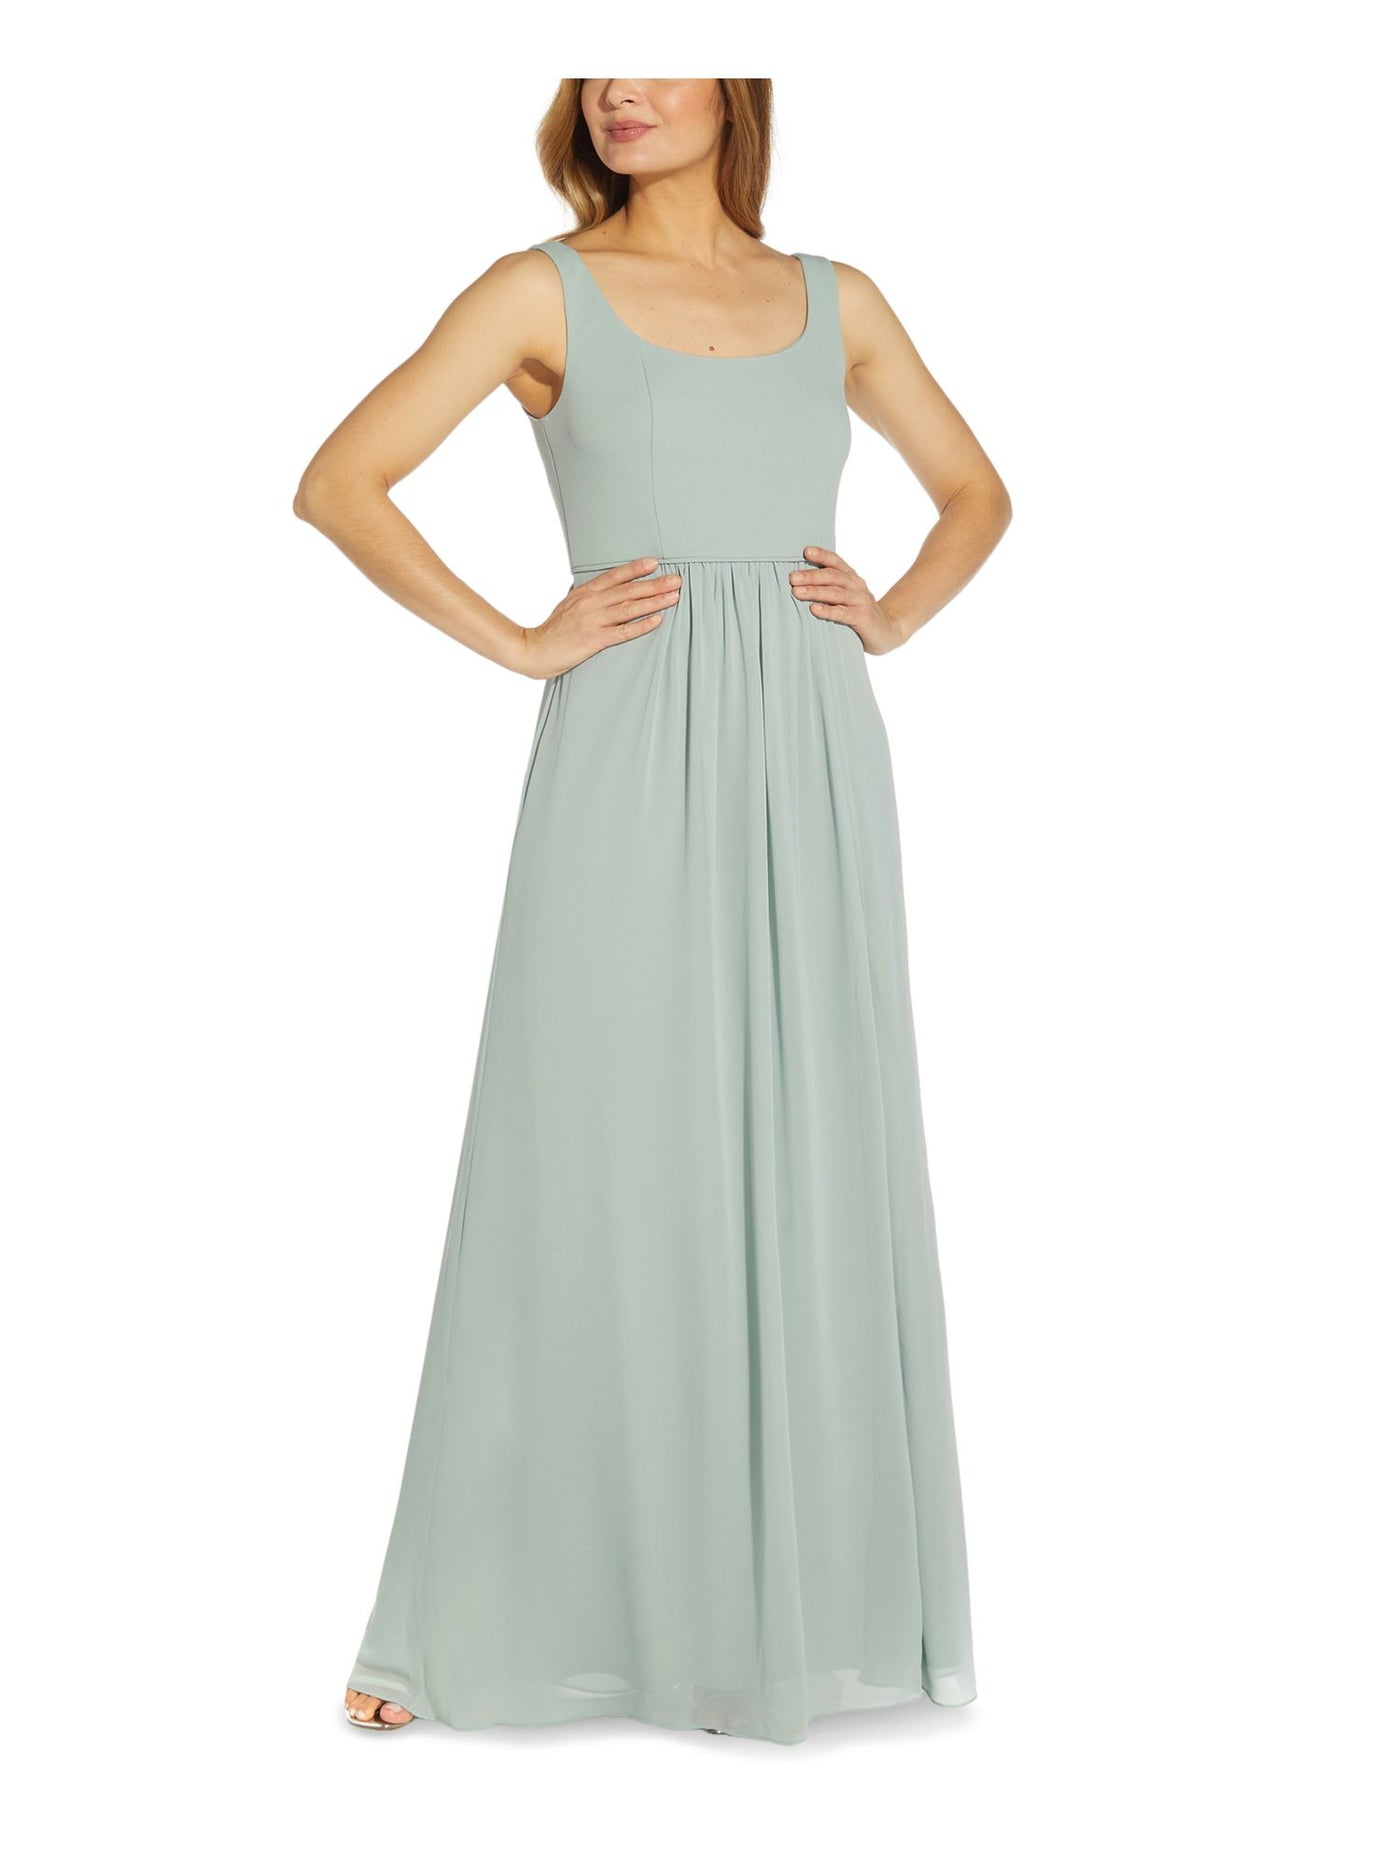 ADRIANNA PAPELL Womens Light Blue Stretch Slitted Zippered Sheer Lined Sleeveless Square Neck Full-Length Evening Gown Dress 10